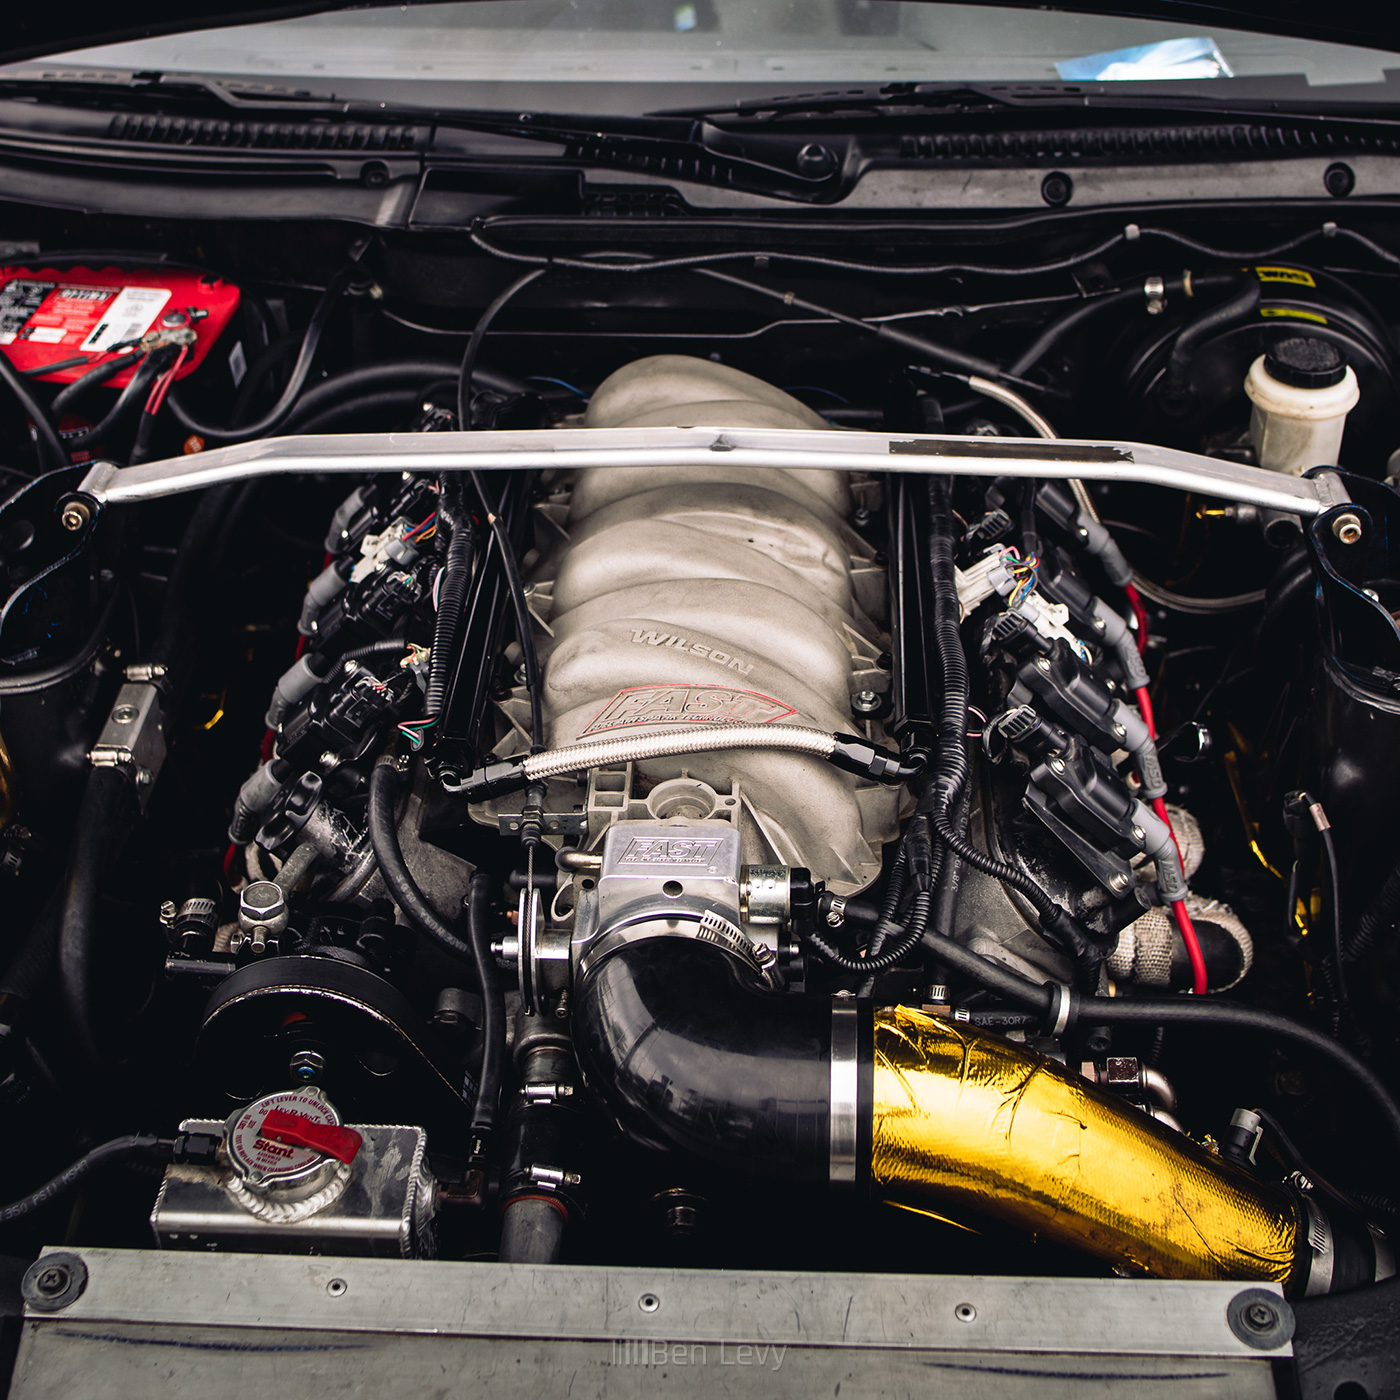 LS Engine in the Bay of a Nissan 300ZX